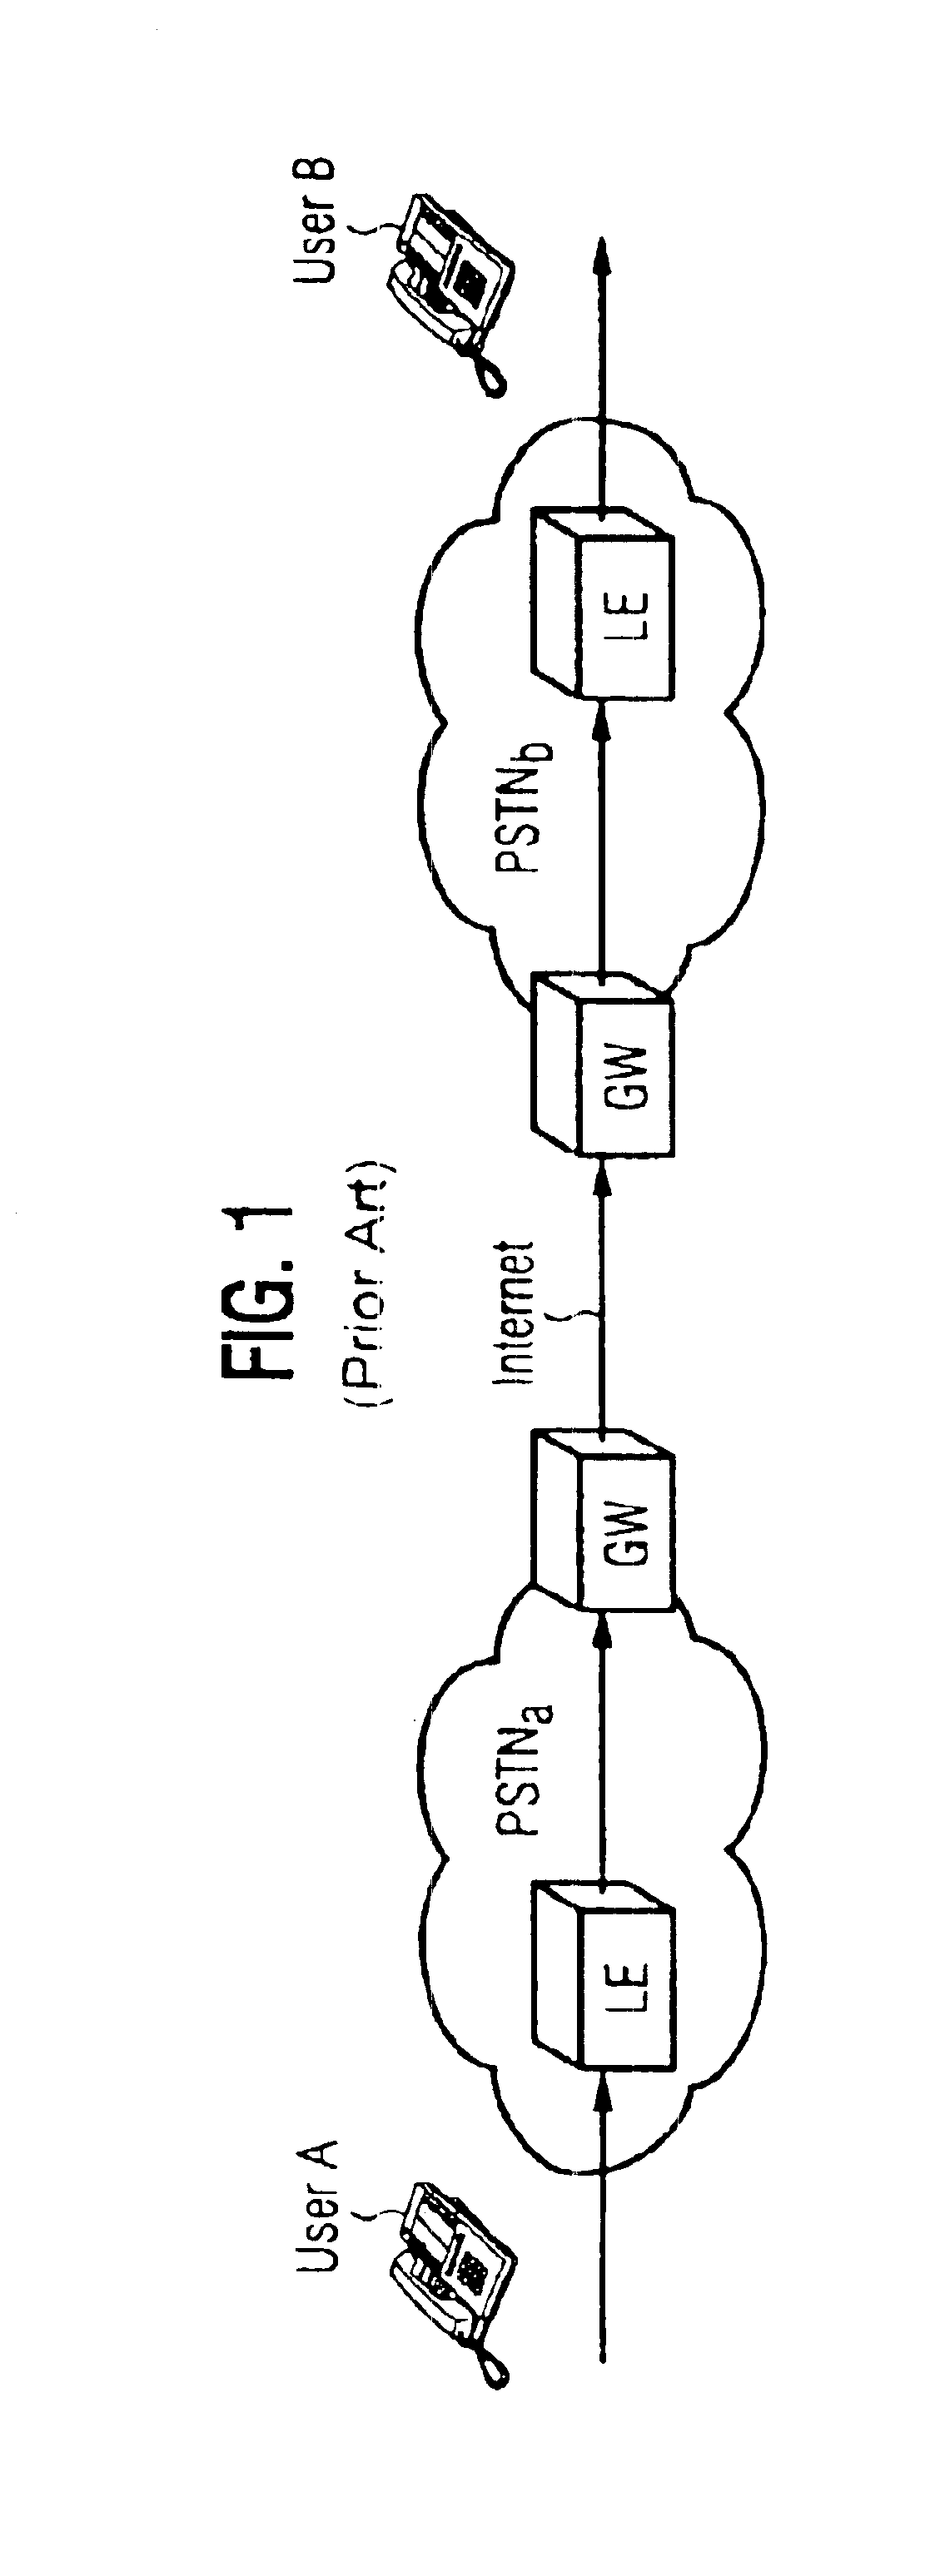 Methods and systems for call routing and codec negotiation in hybrid voice/data/internet/wireless systems